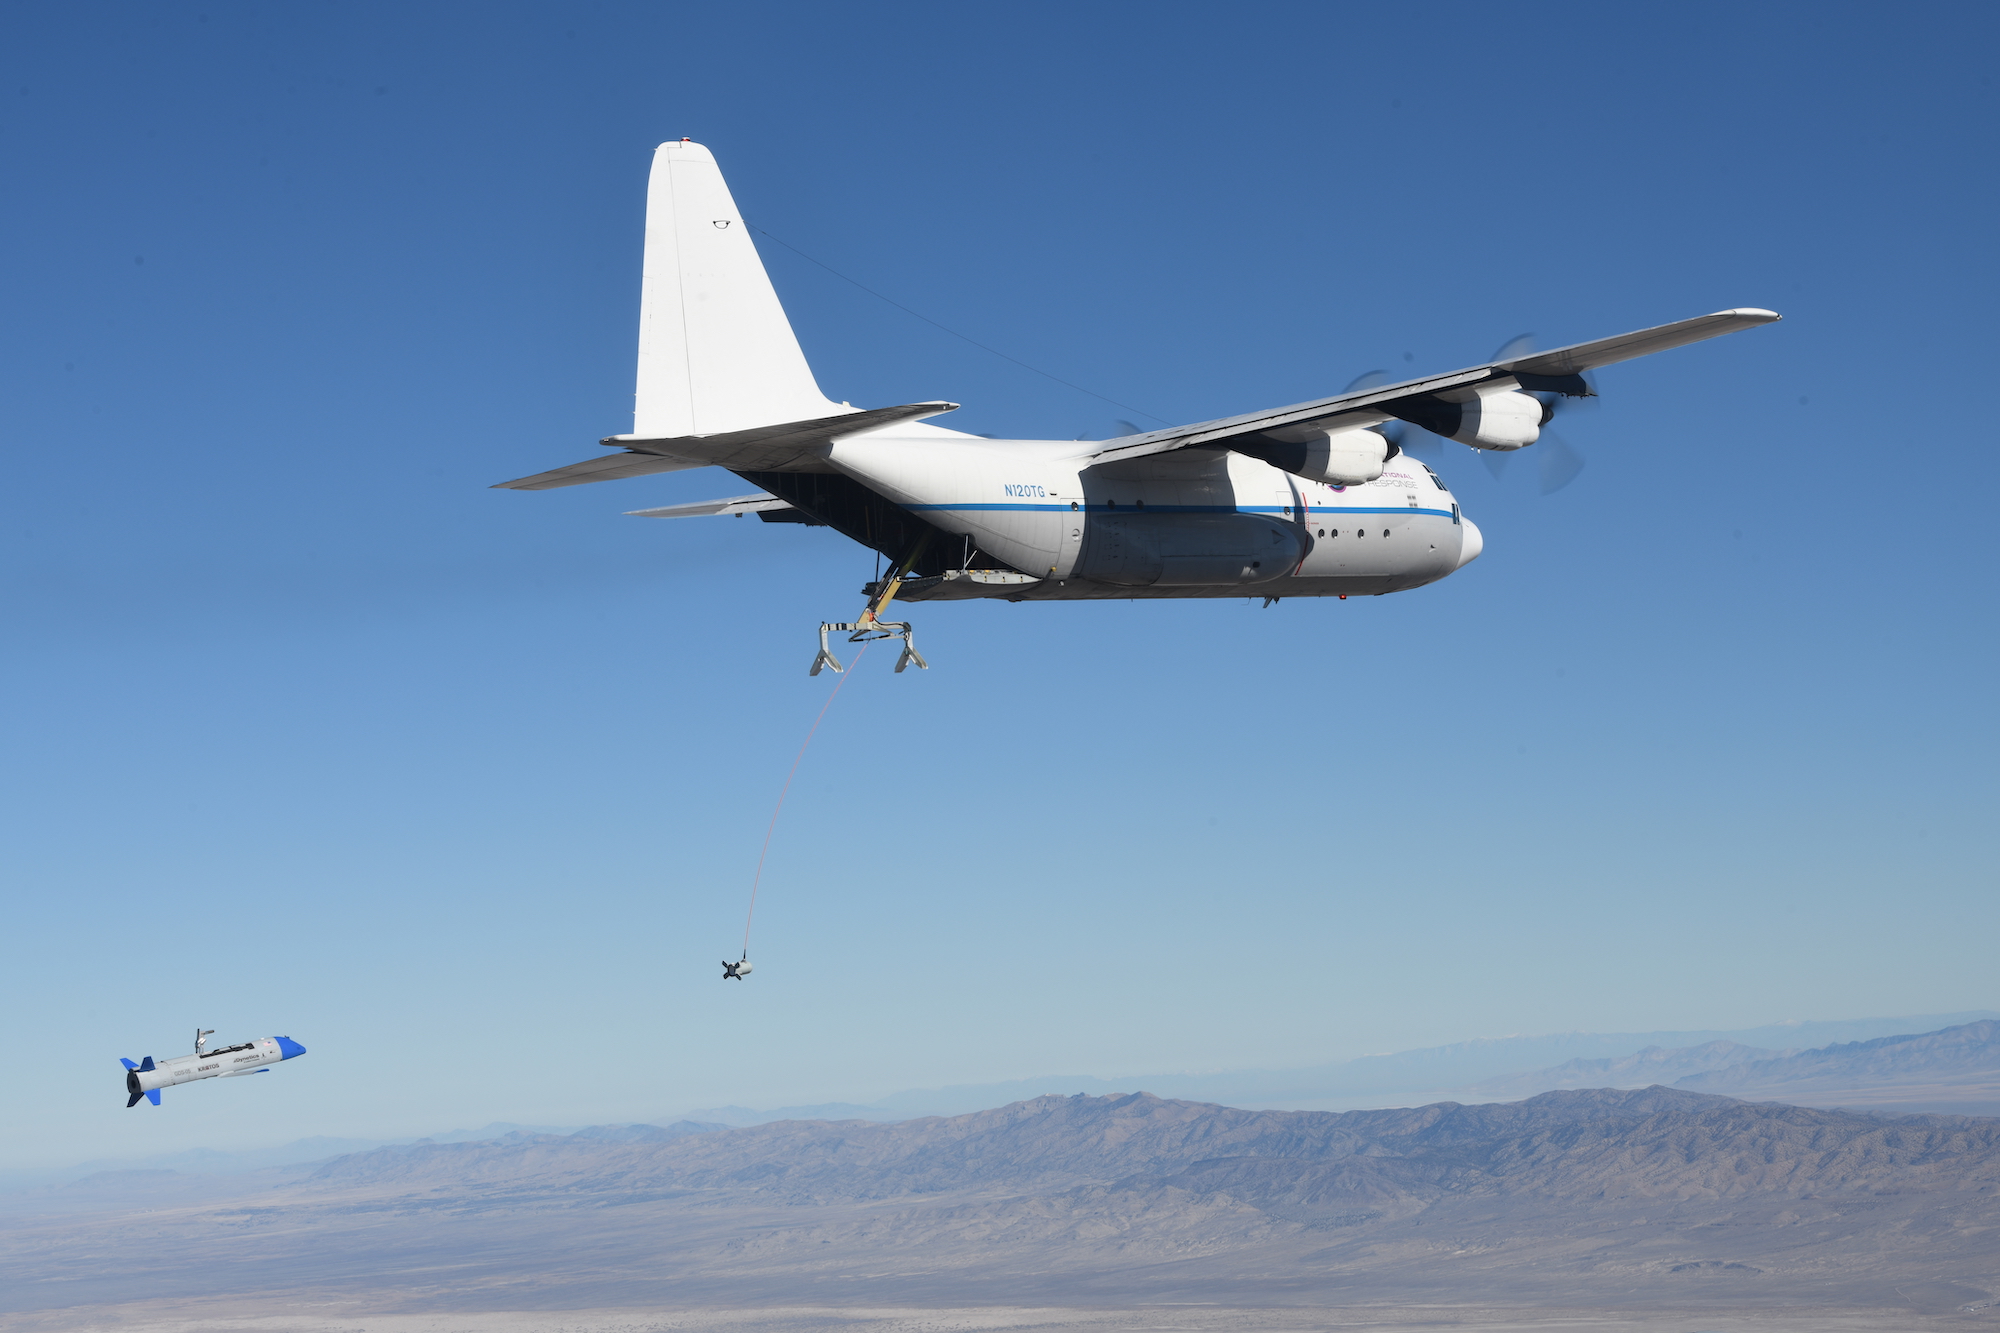 DARPA grabbed a drone out of the sky. Here's how.